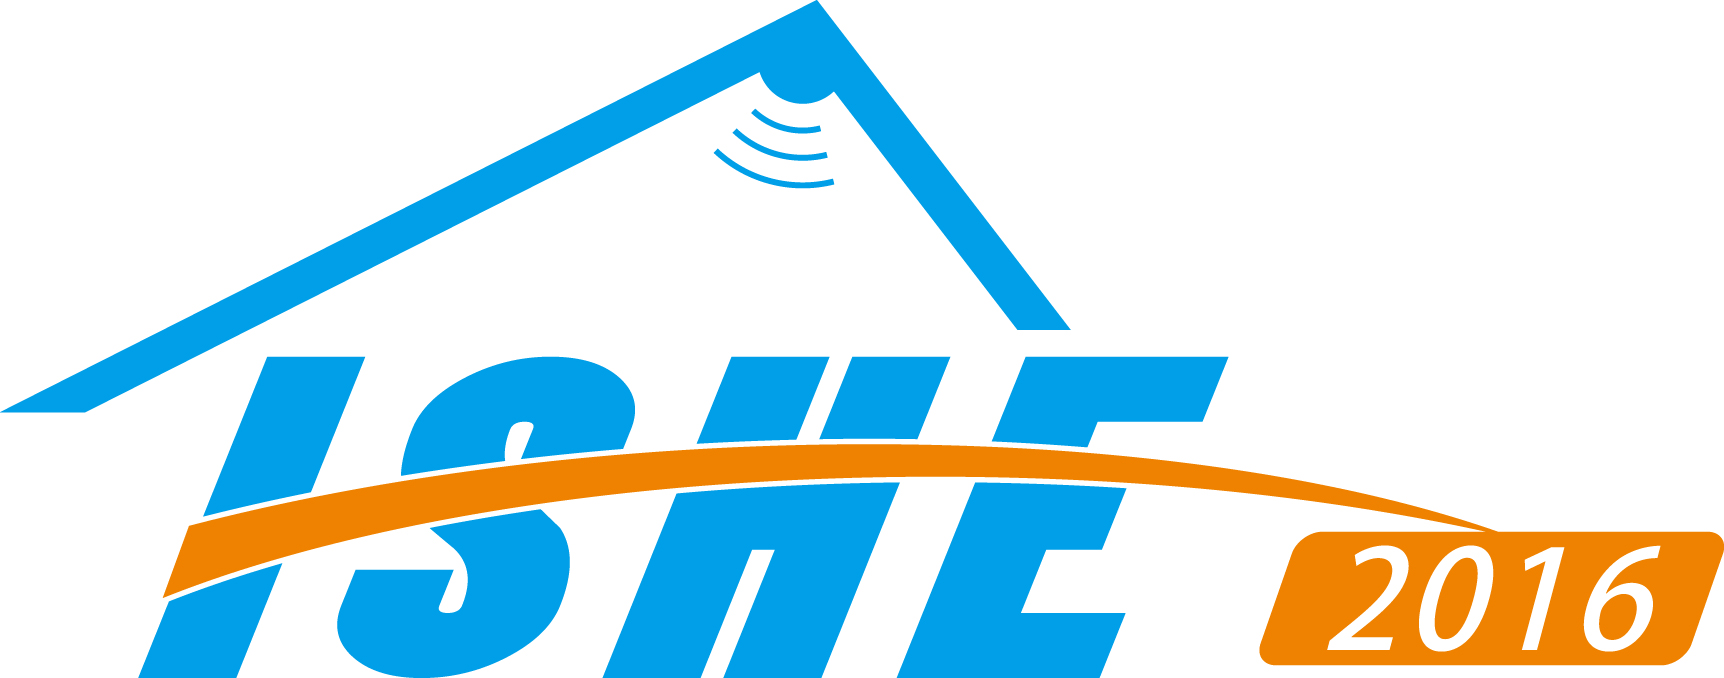 LSVT will participate in ISHE 2016